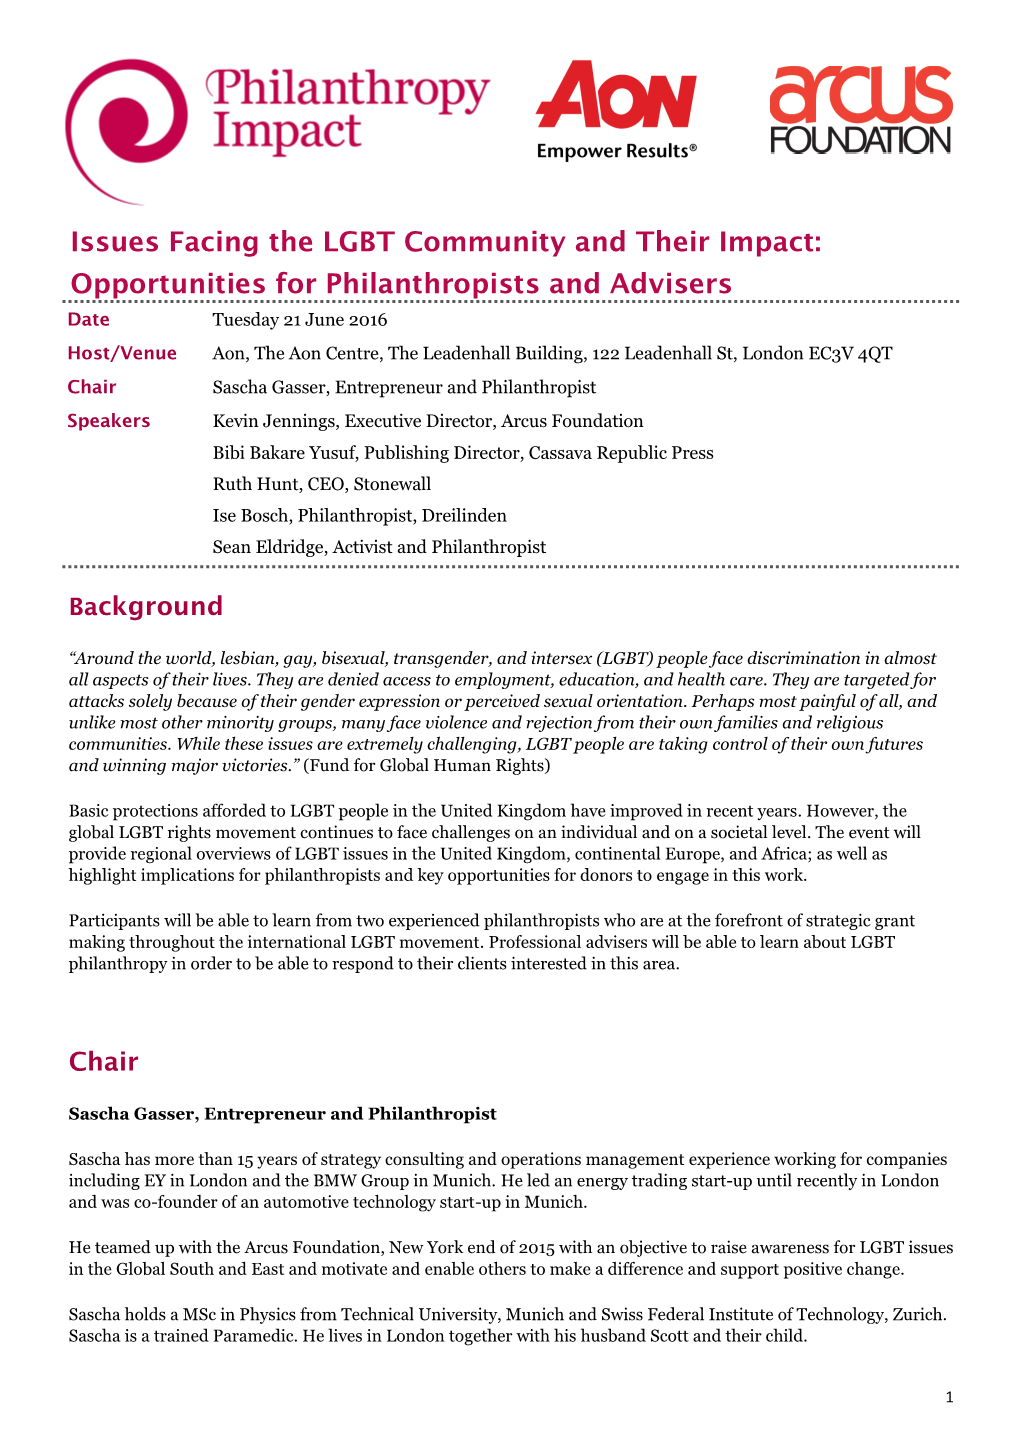 Issues Facing the LGBT Community and Their